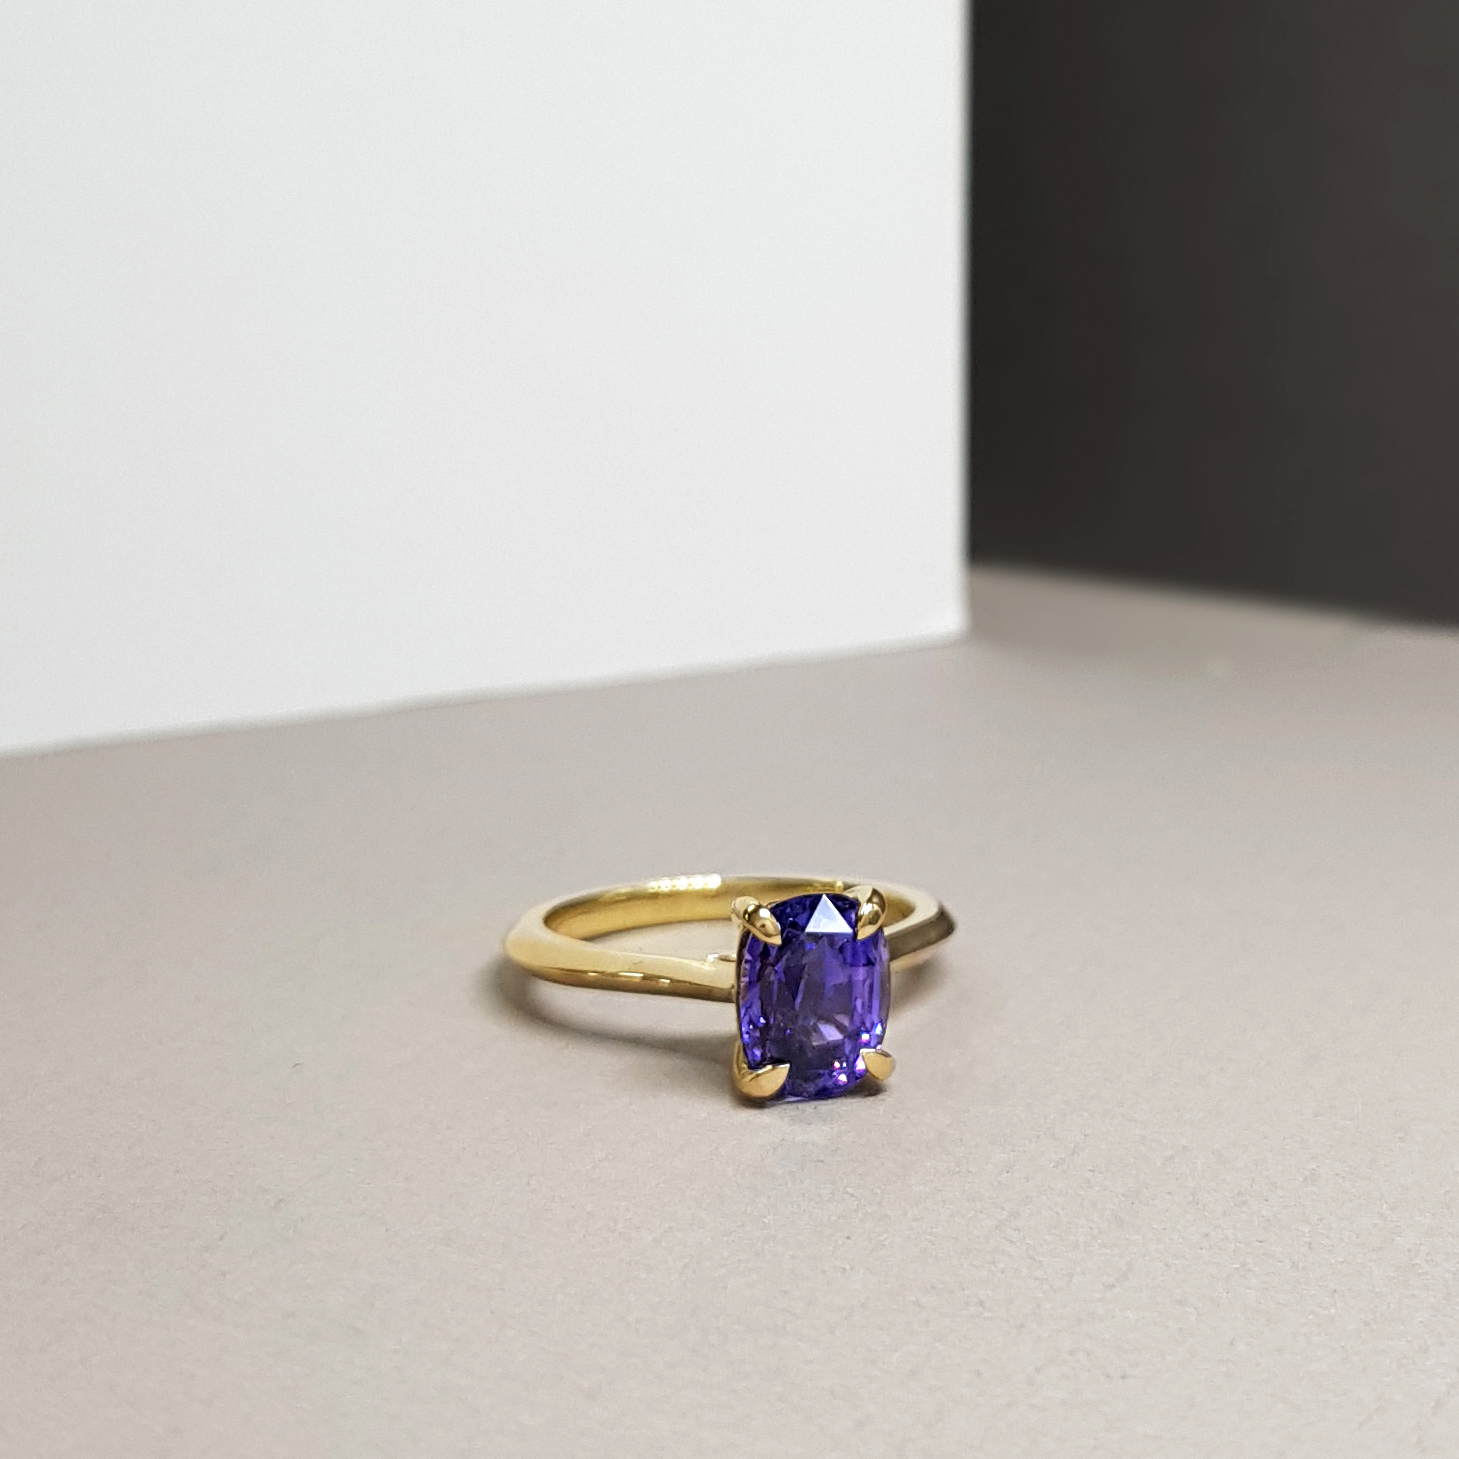 a single stone engagement ring with a large purple sapphire on a yellow fairtrade gold band, lying on a grey background